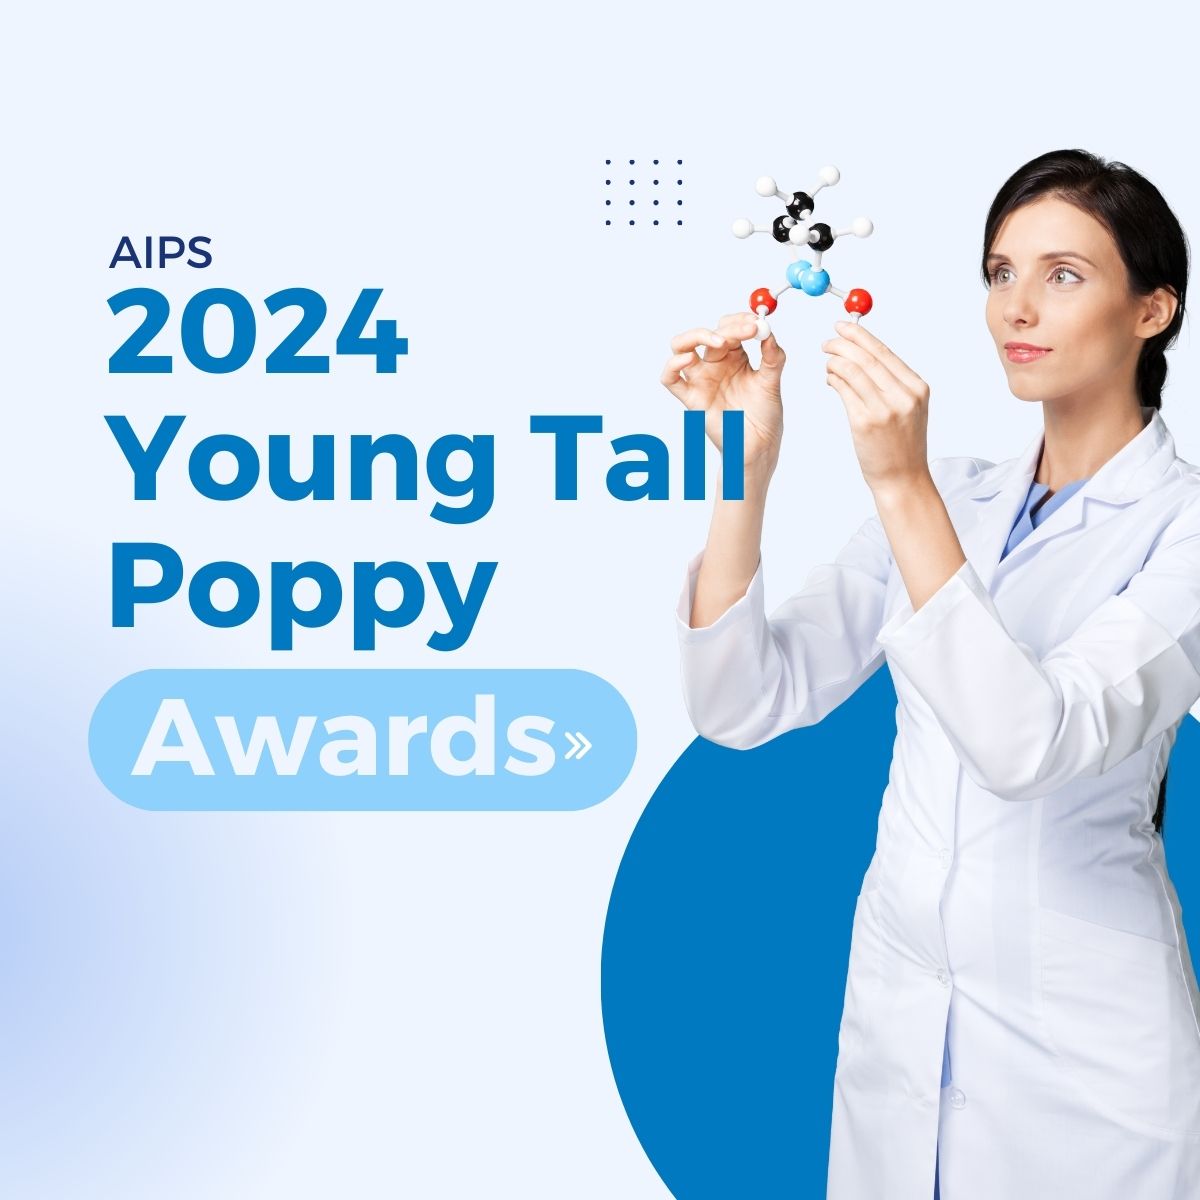 Further excel your research career and open up new outreach opportunities...become a Young Tall Poppy science award winner and join over 1000 Young Tall Poppy alumni! Nominations open later this week (22nd Feb) aips.net.au/2024-young-tal… #ytp24 #tallpoppy #scienceawards